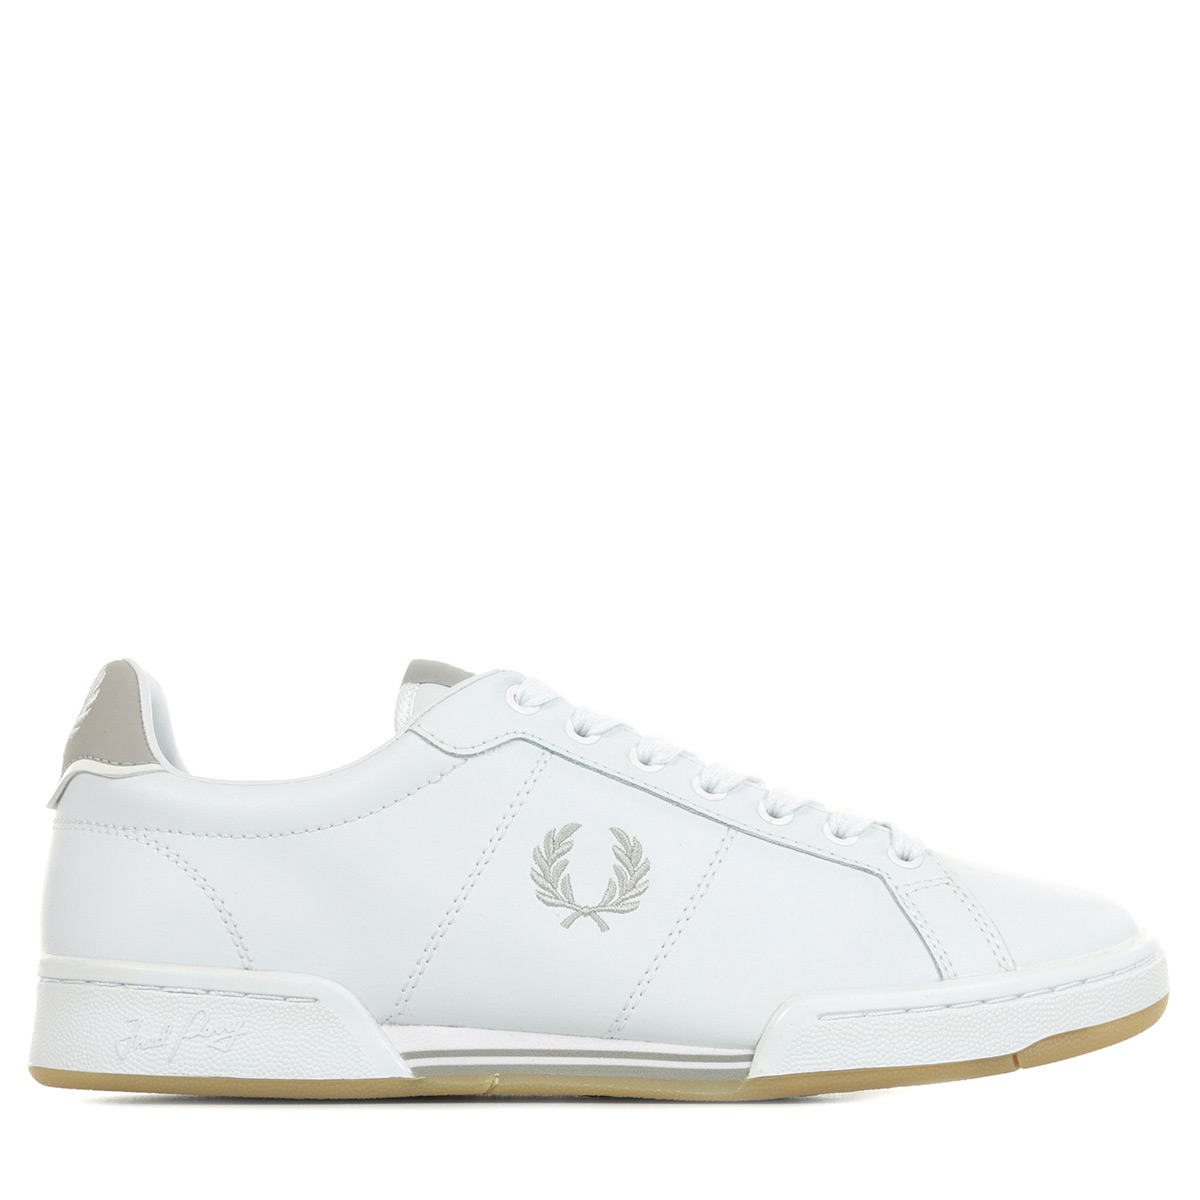 Fred Perry "B722"